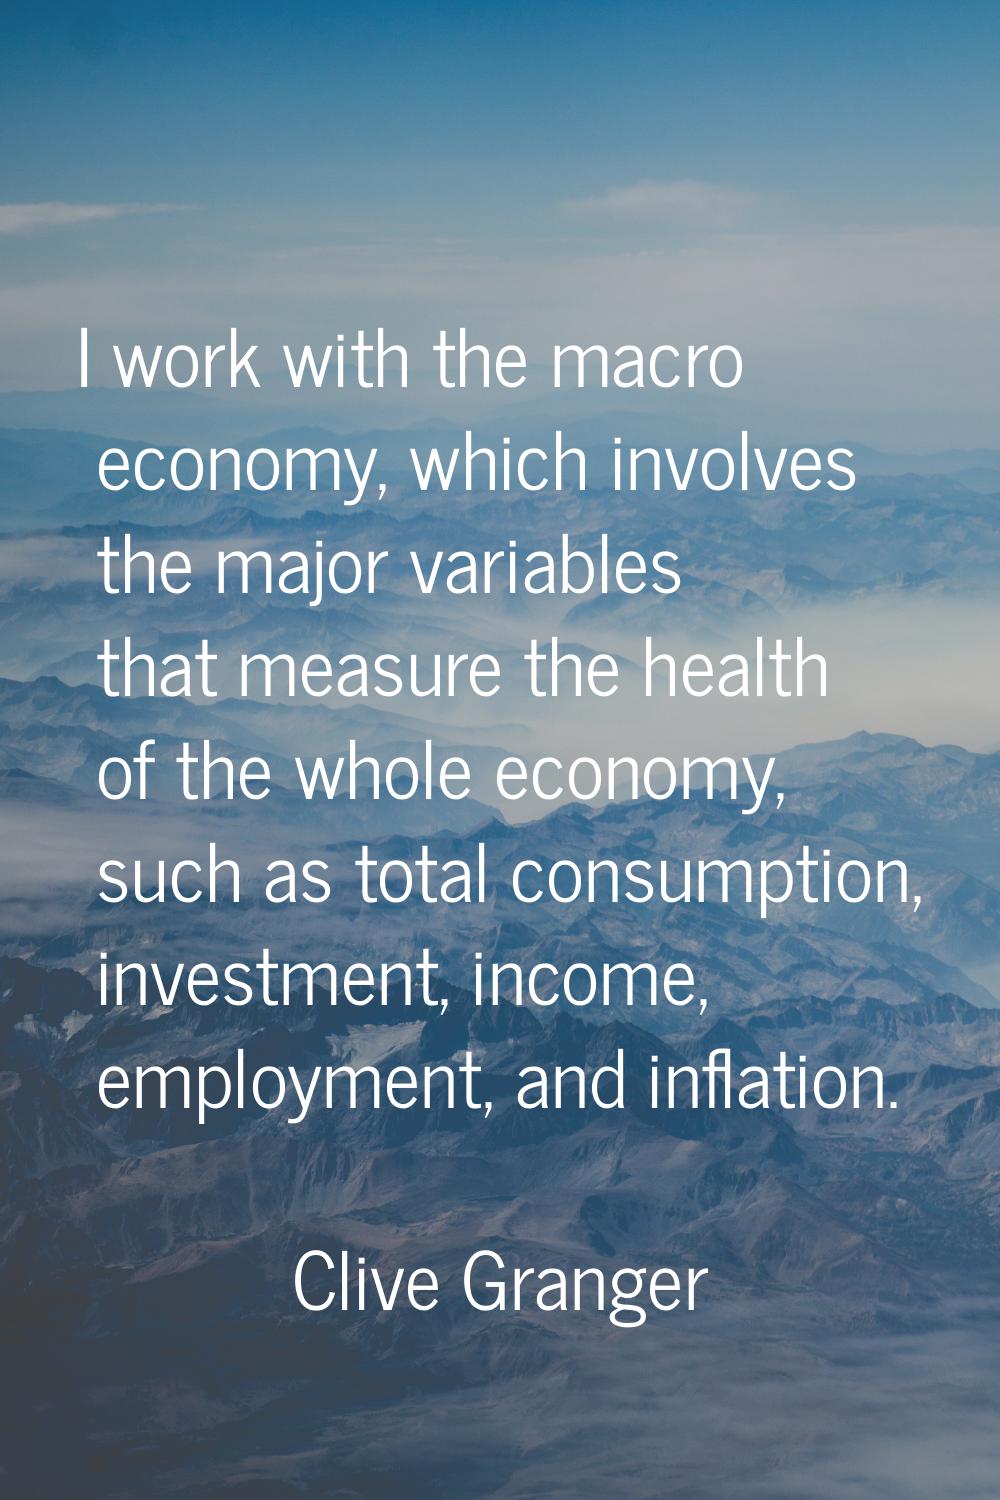 I work with the macro economy, which involves the major variables that measure the health of the wh